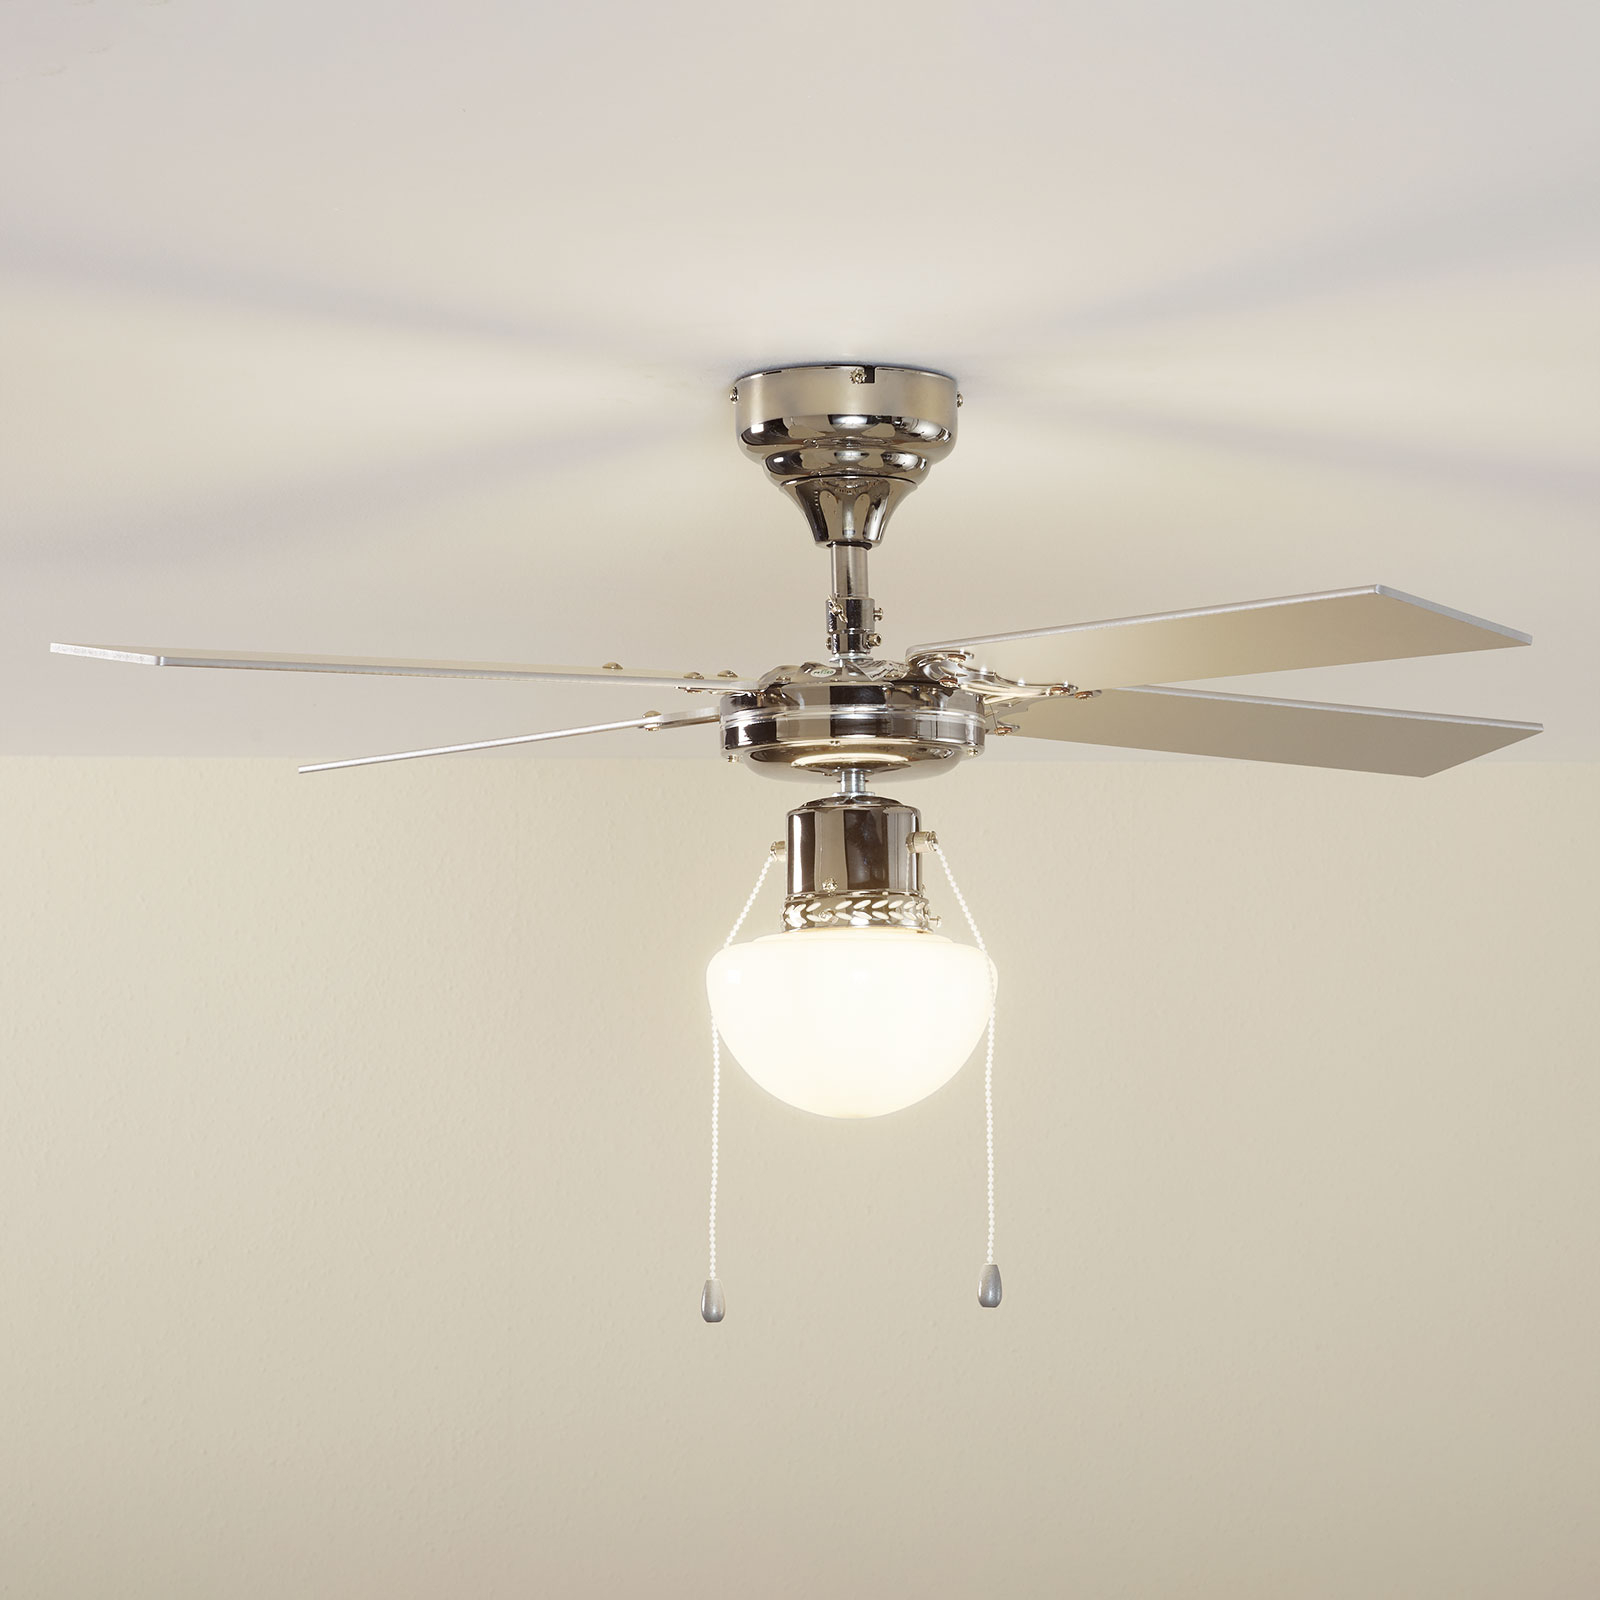 Milana ceiling fan with light, E27